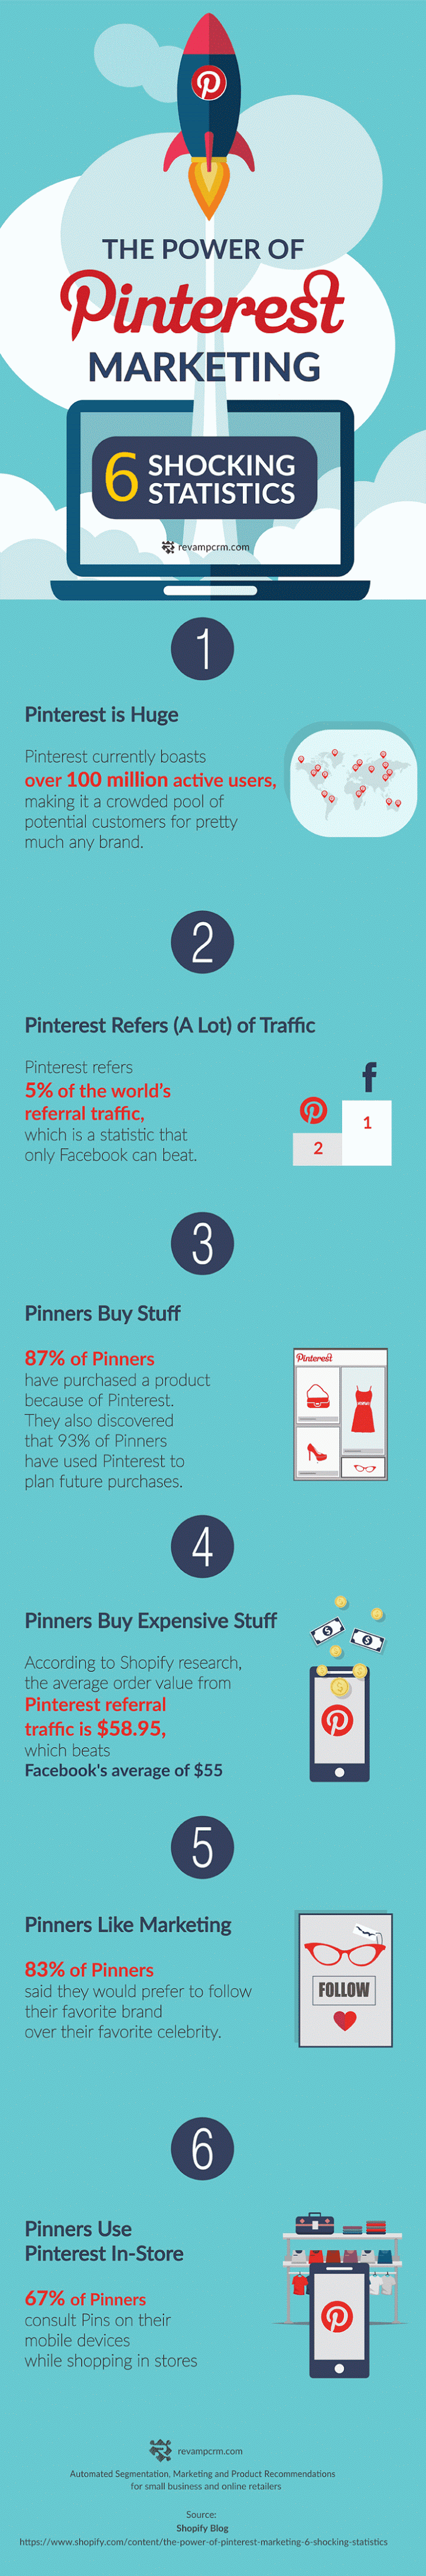 Infographic of the Week: Six Statistics about Pinterest That You Probably Didn’t Know